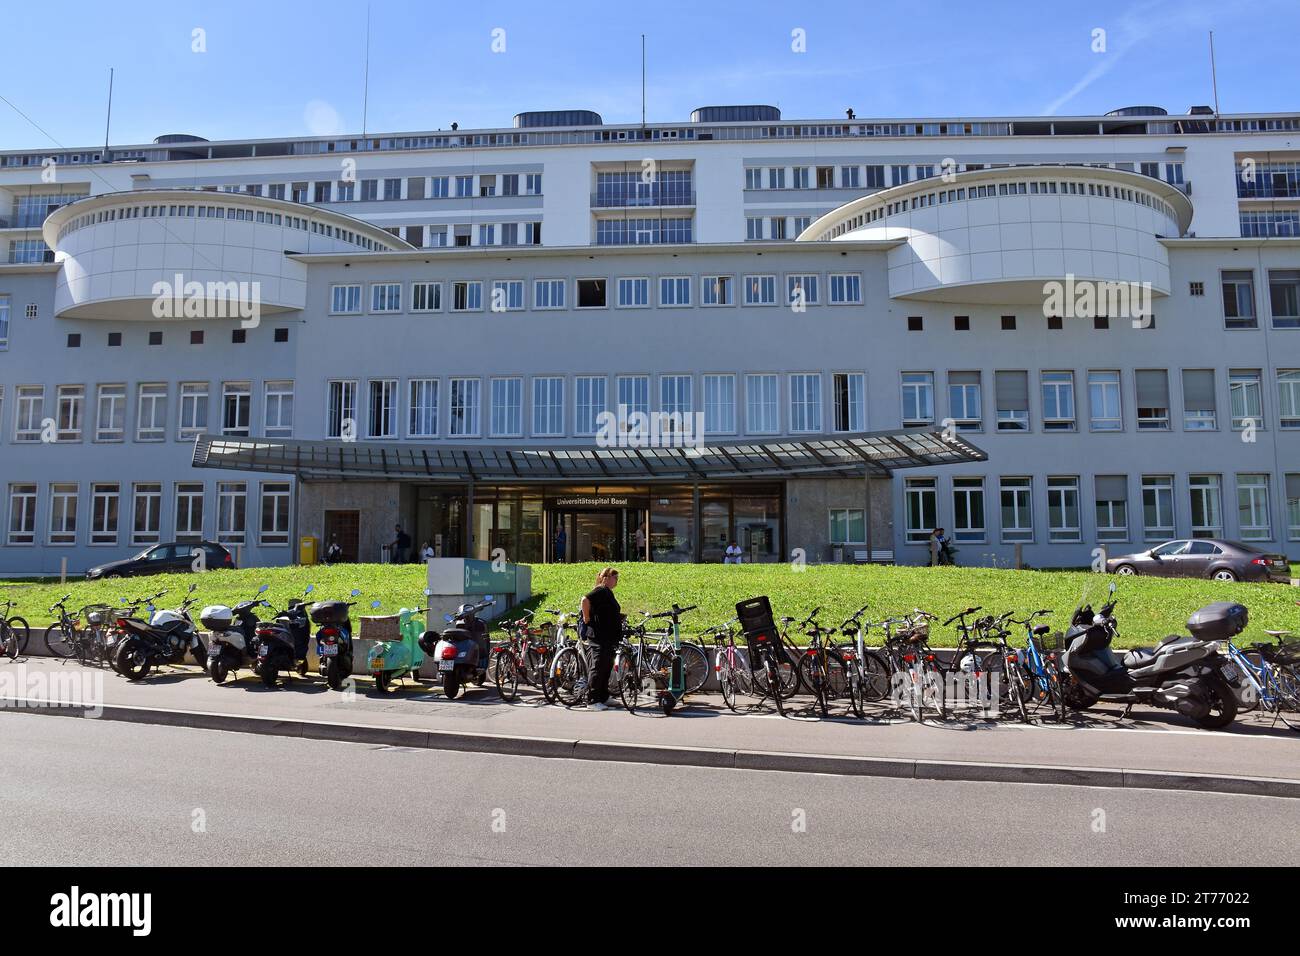 Basel University Hospital, Built 1937-45, architect Hermann Baur, considered a classic, the first modernist hospital building in Switzerland Stock Photo